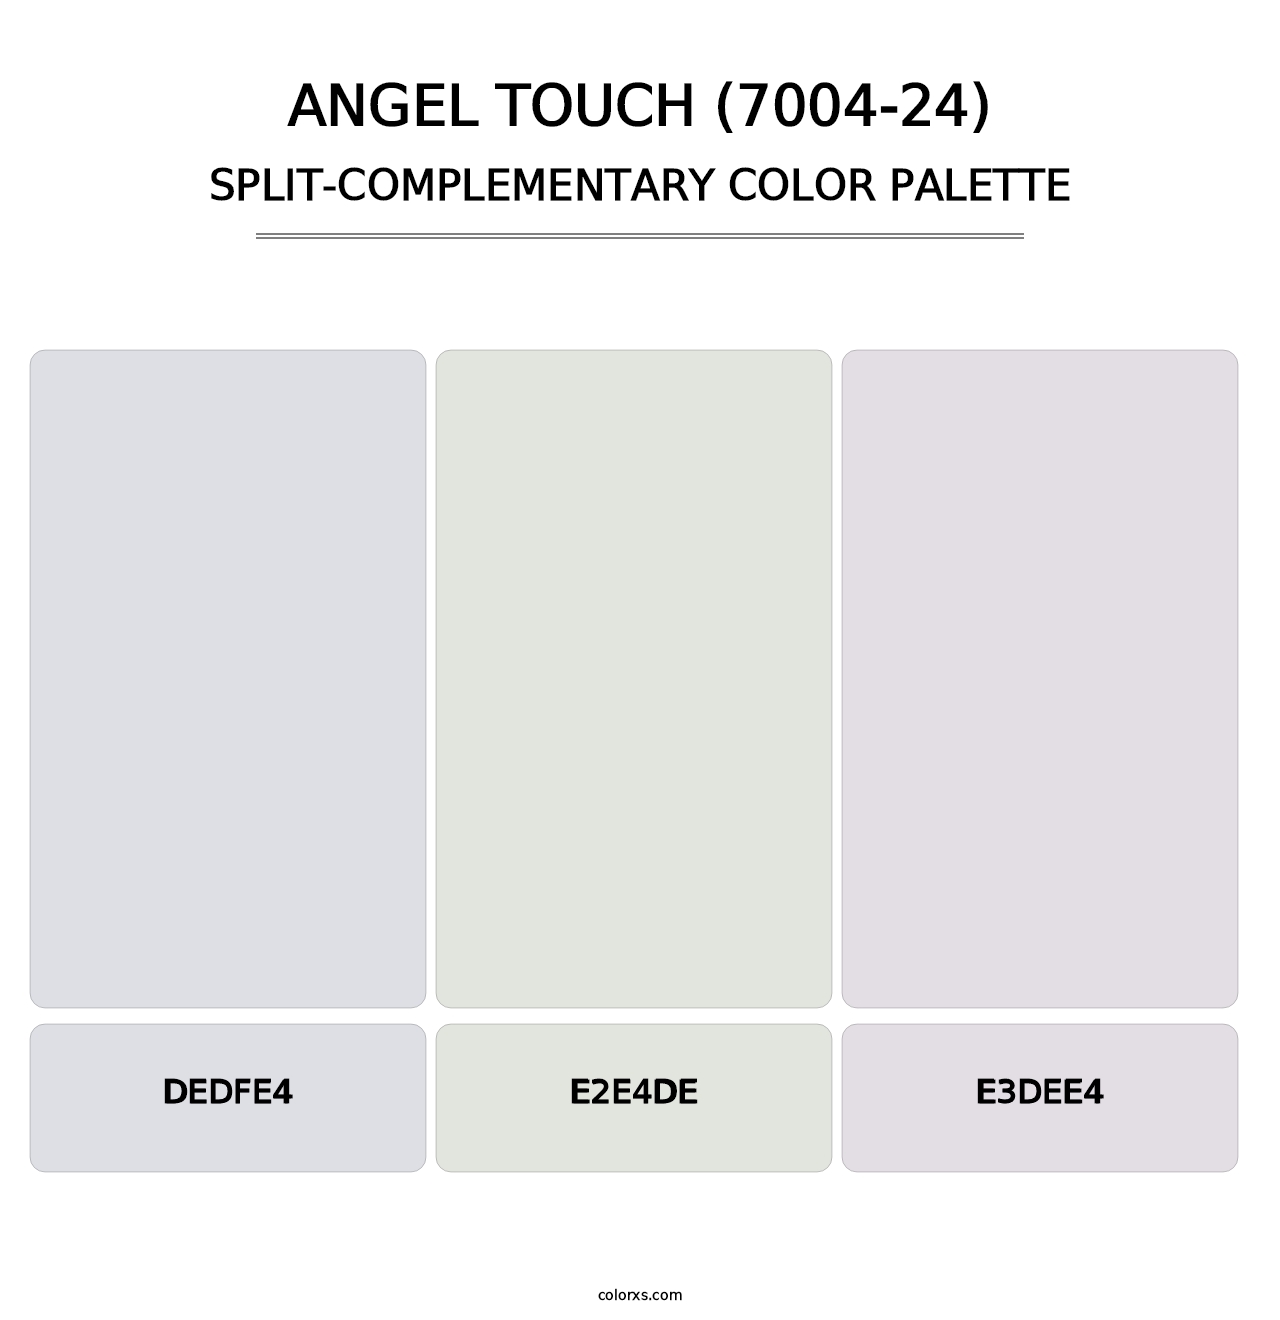 Angel Touch (7004-24) - Split-Complementary Color Palette